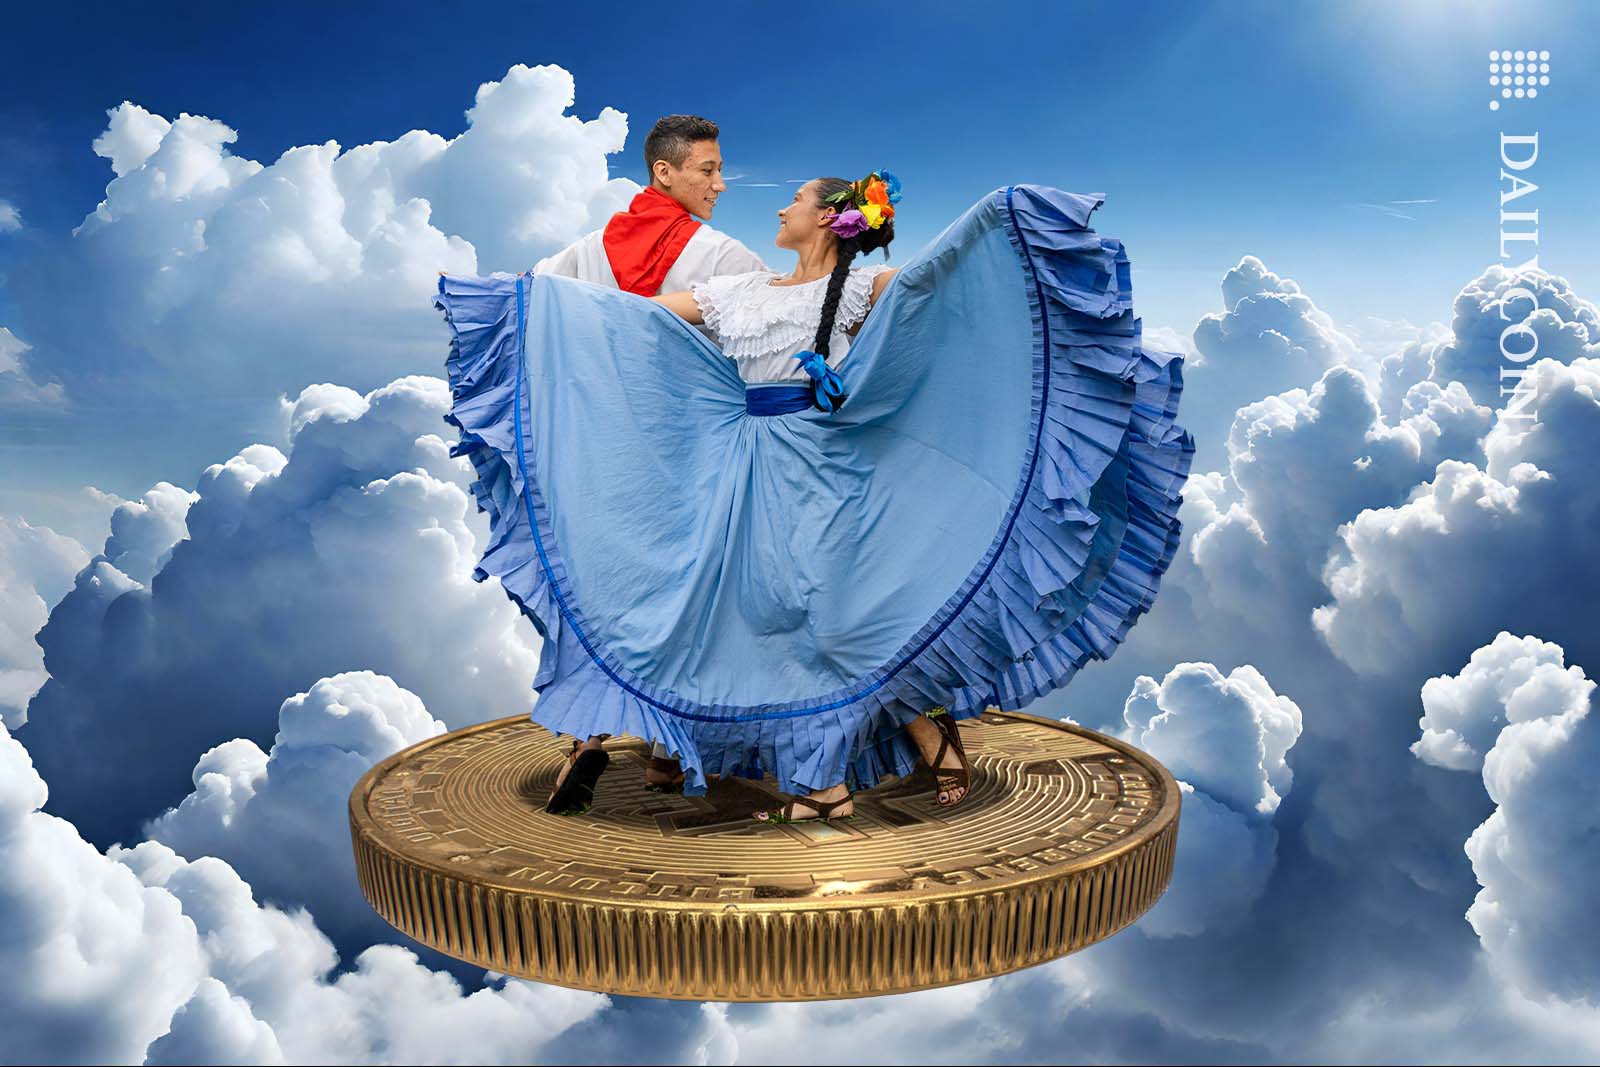 Traditionally dressed El Salvadorian couple dancing on a Bitcoin.